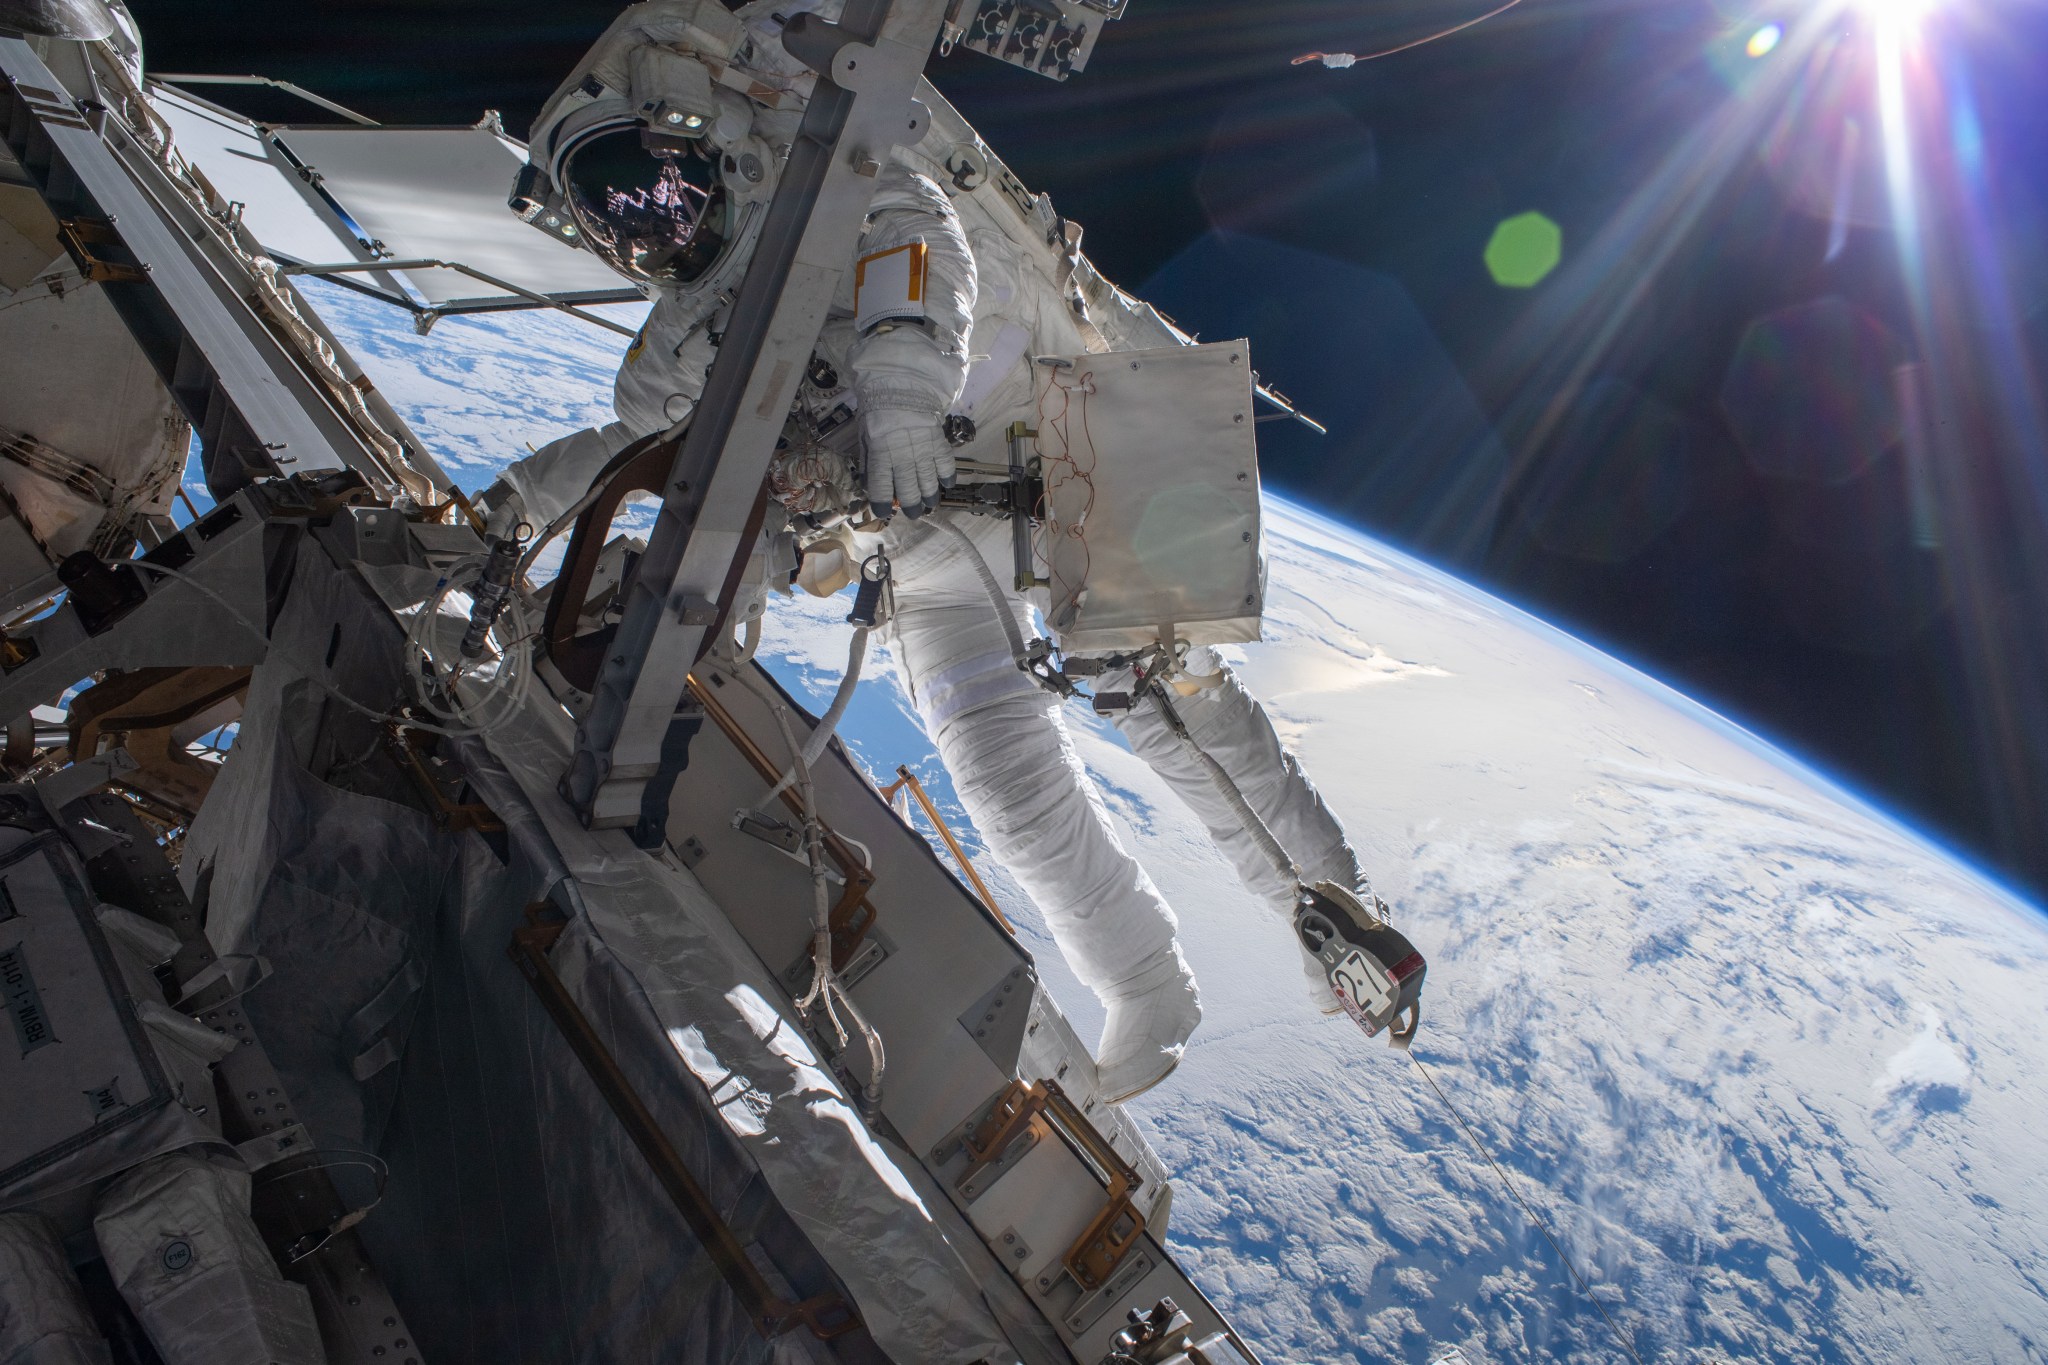 Astronaut Matthias Maurer of ESA (European Space Agency) is pictured on the International Space Station's truss structure during a spacewalk to install thermal gear and electronics components on the orbiting lab,